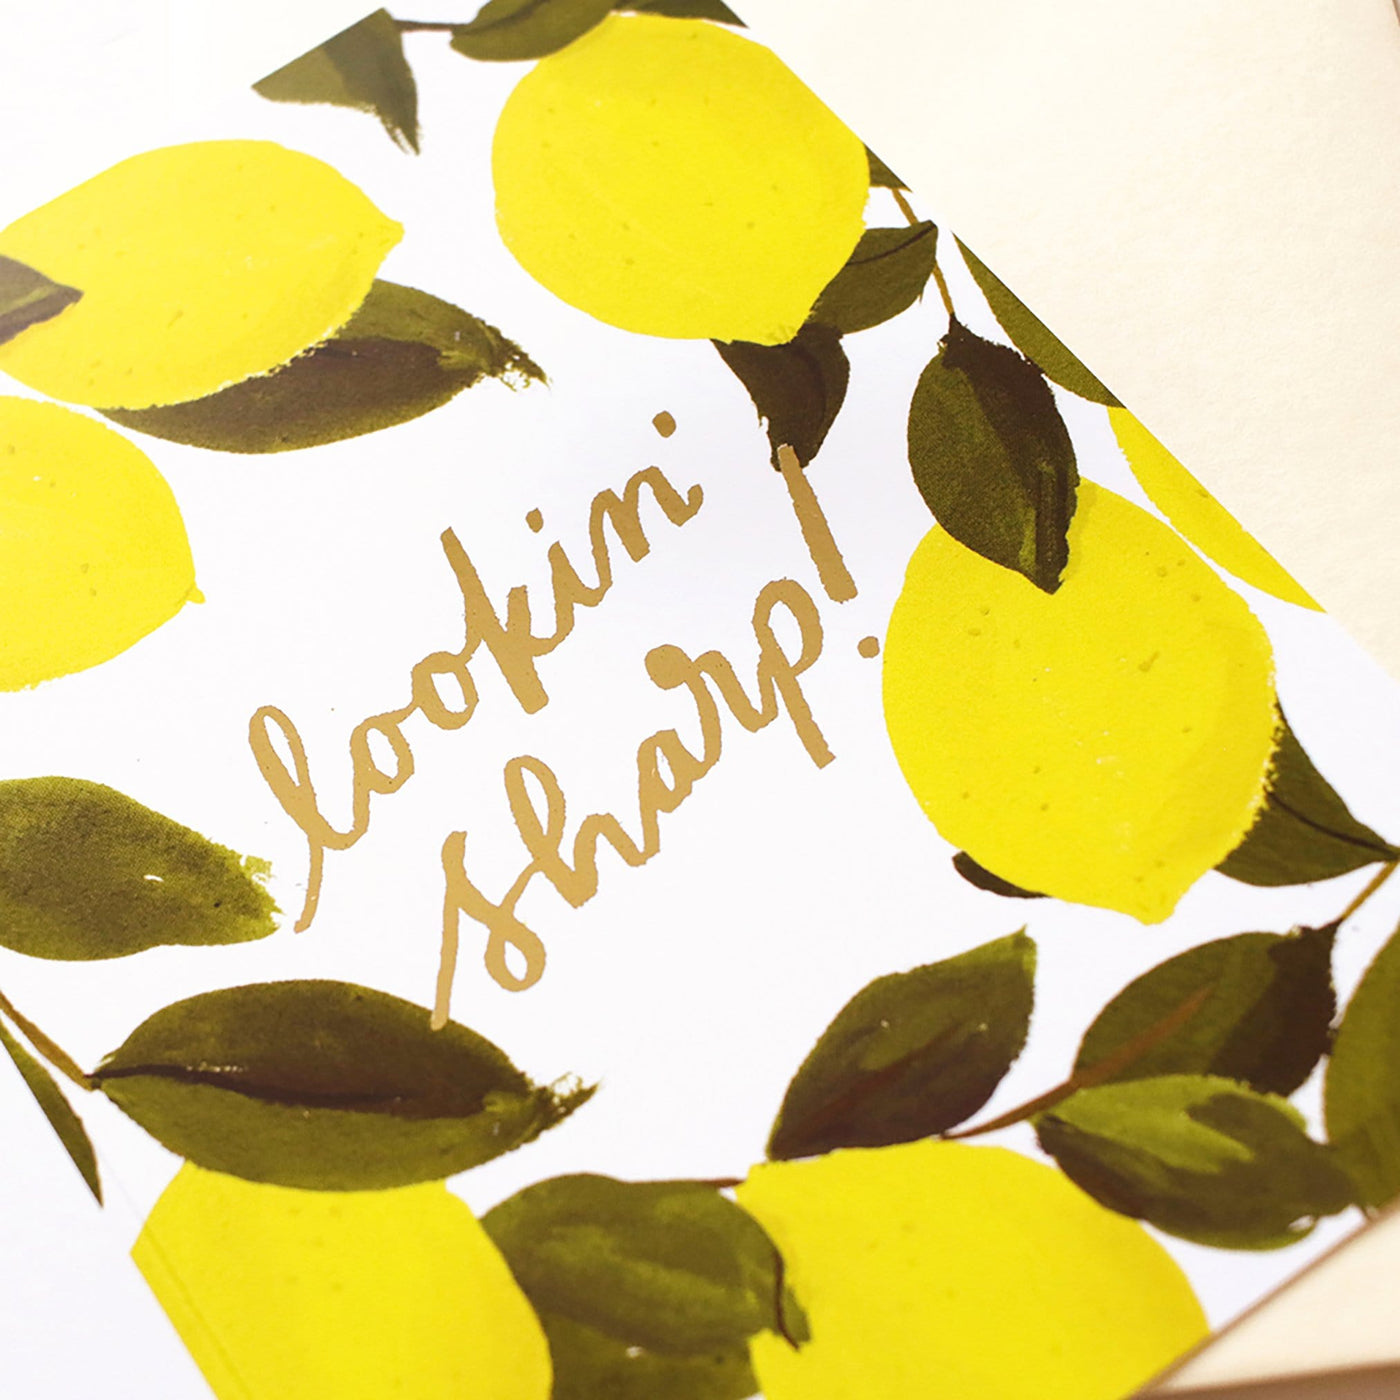 Illustrated Lemon and Green Leaf A6 Card With Looking Sharp In Gold Lettering With Pale Yellow Envelope - Annie Dornan Smith